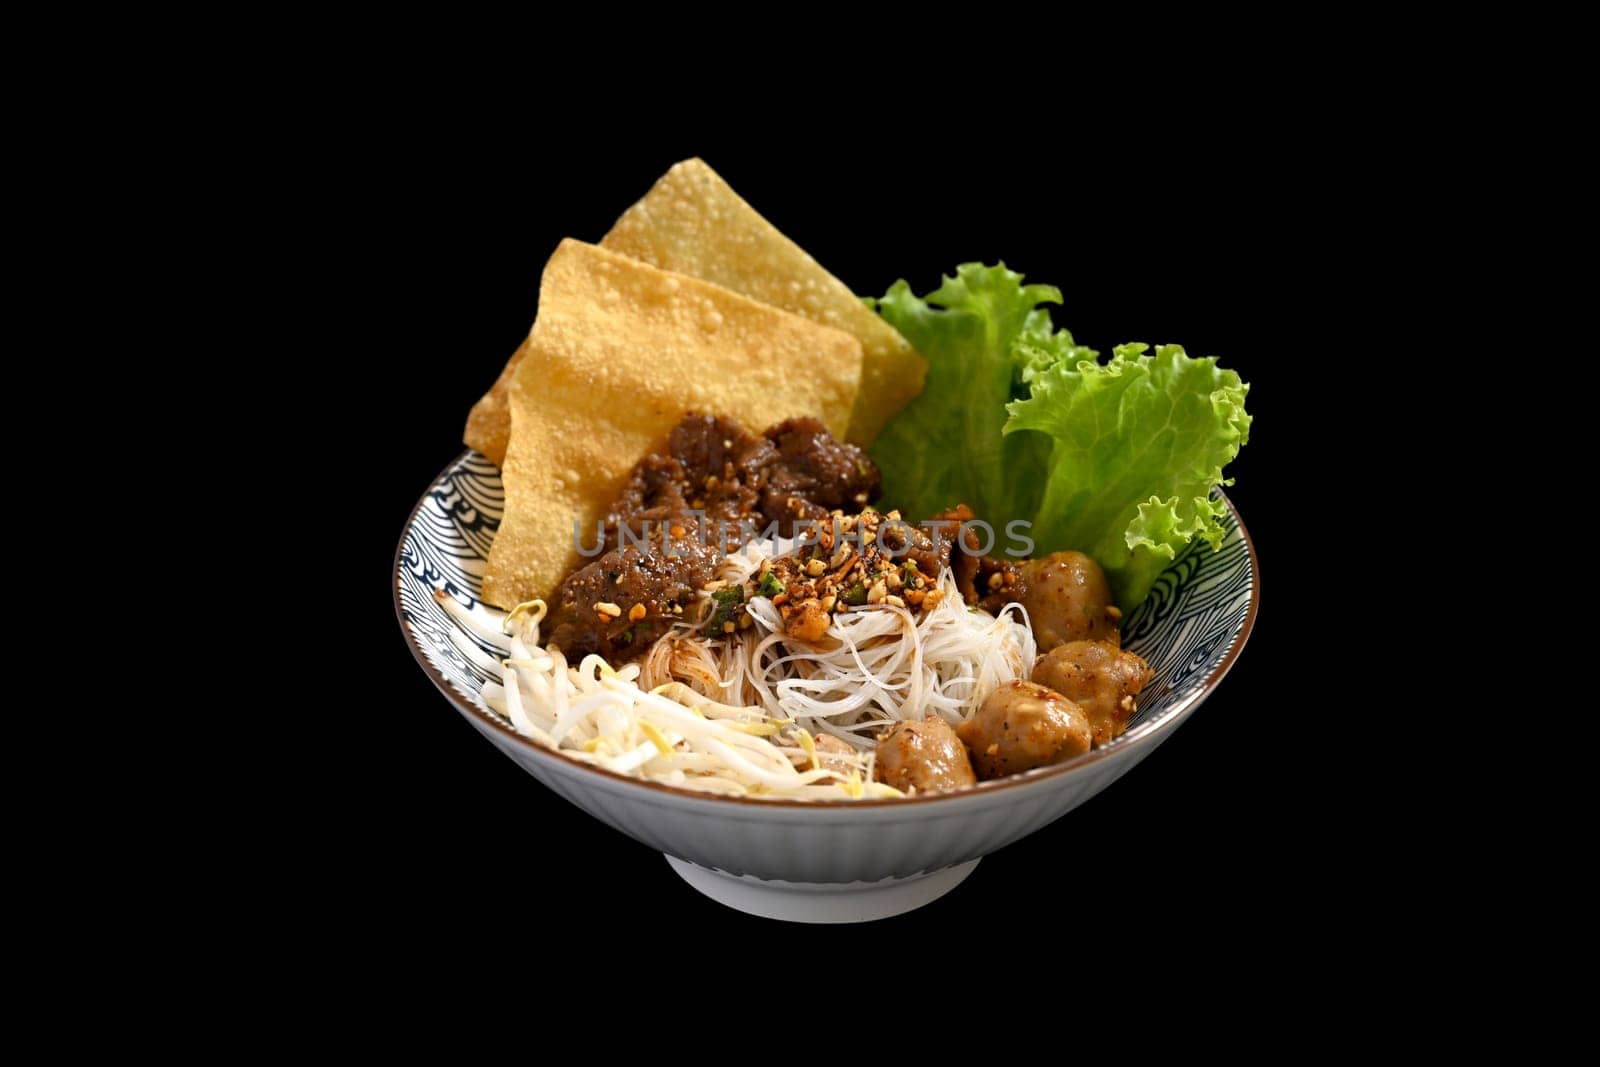 Rice noodles with sliced braised beef, meatballs and vegetables in a bowl on black background.